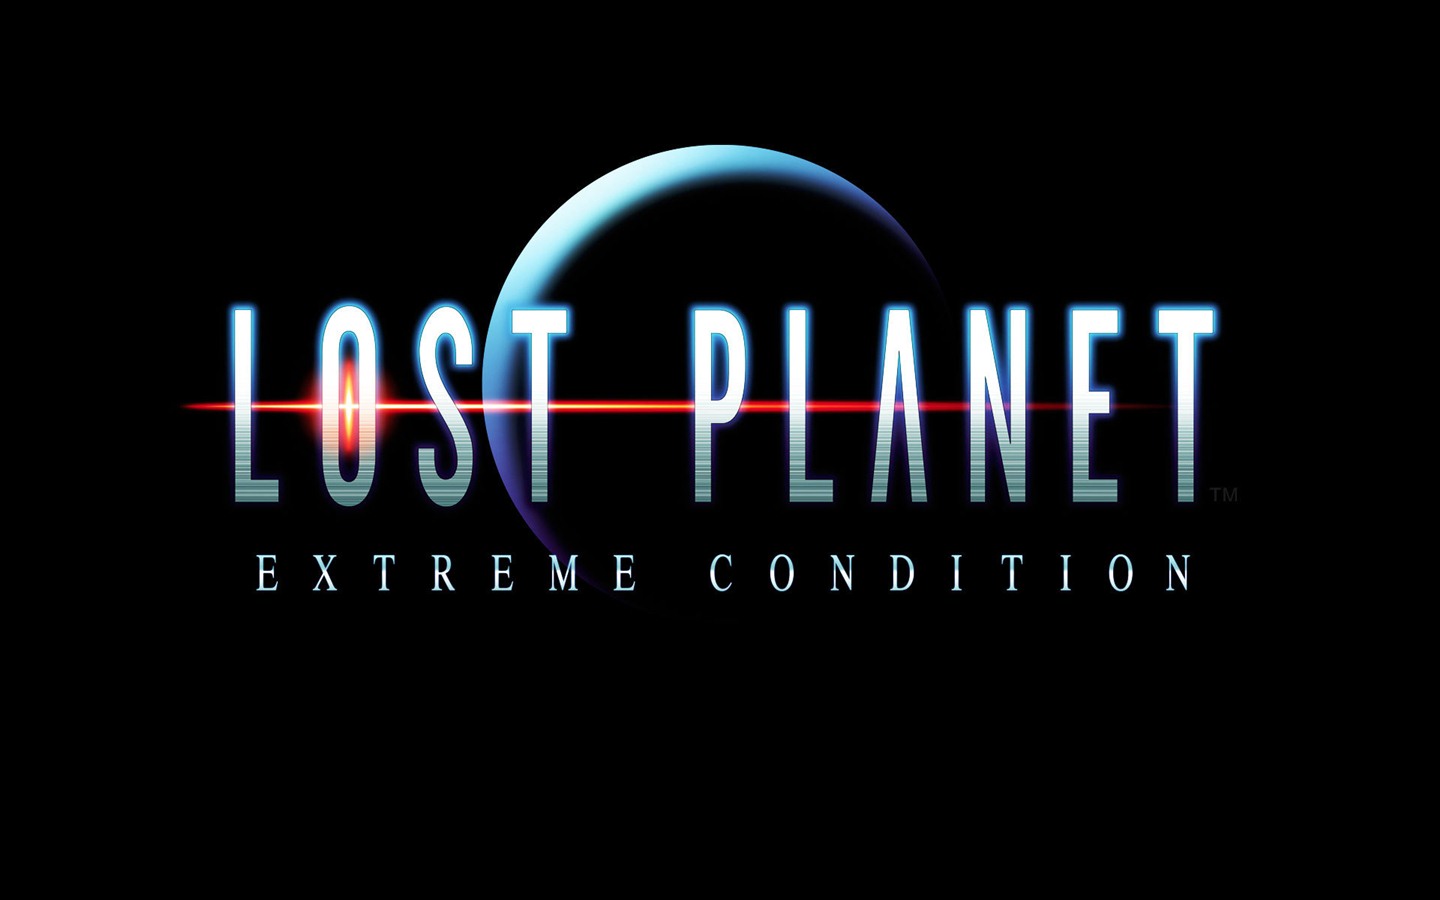 Lost Planet: Extreme Condition HD Wallpaper #14 - 1440x900